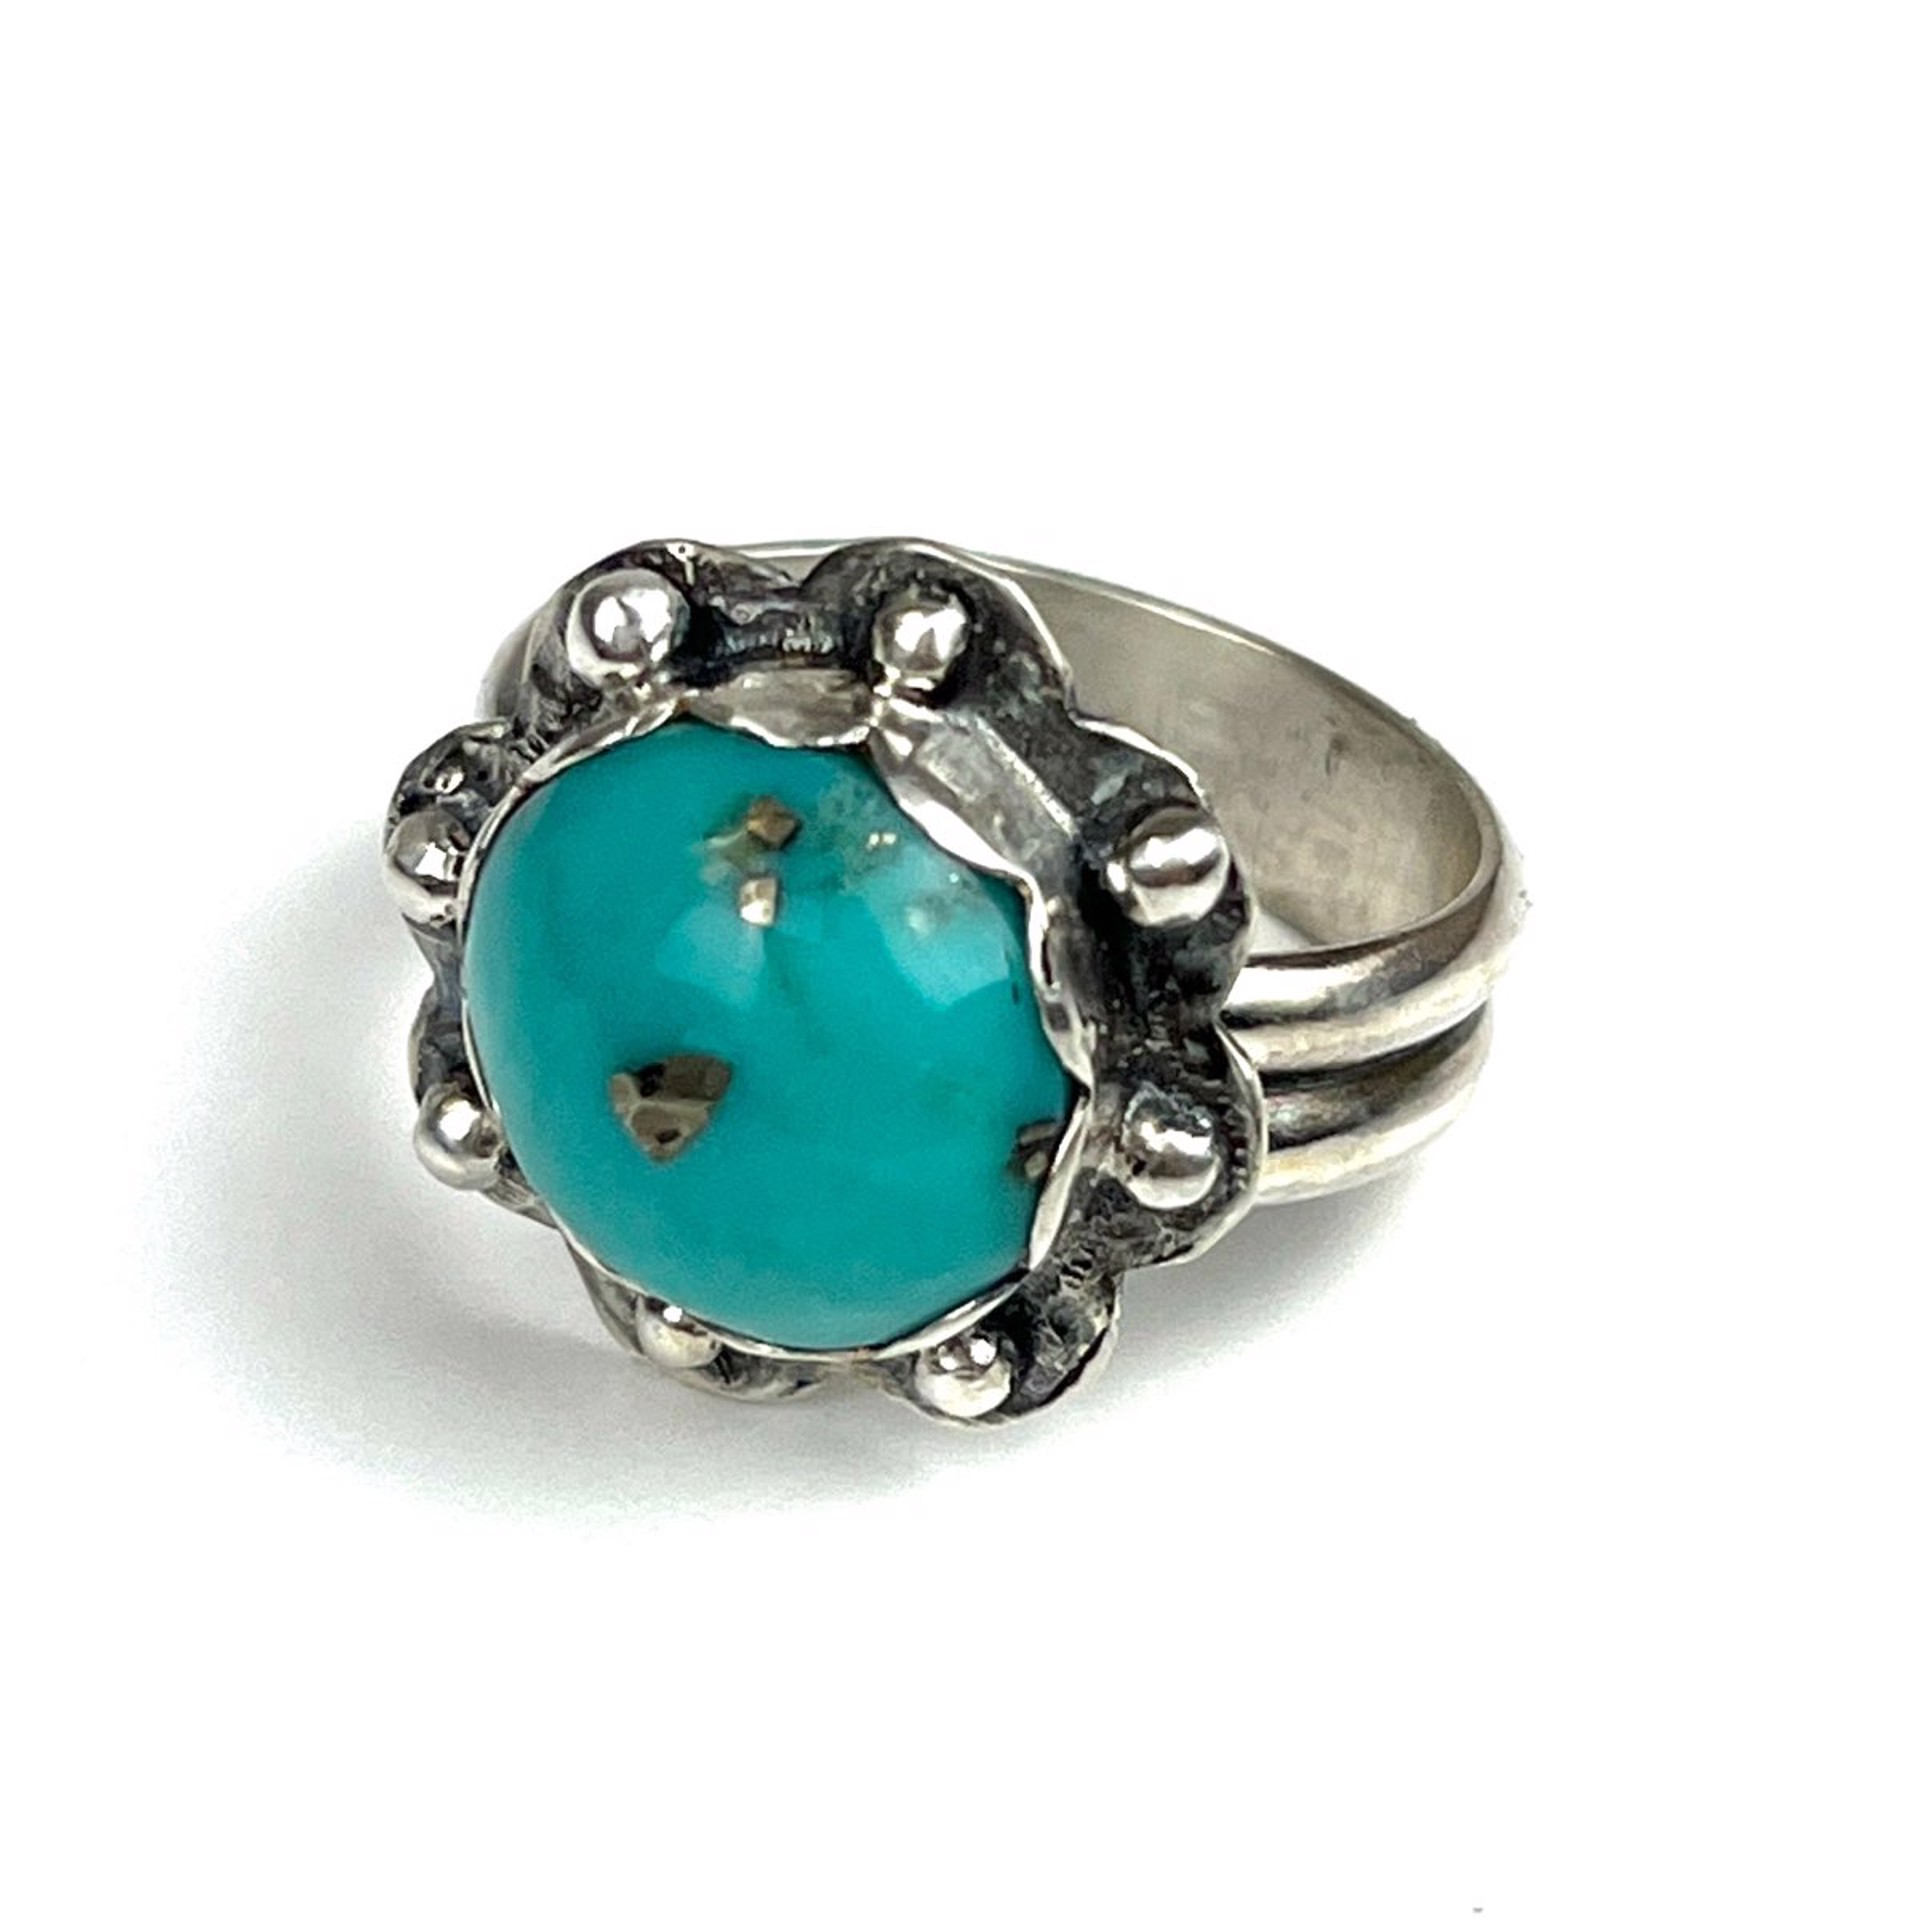 Turquoise Ring by Nola Smodic